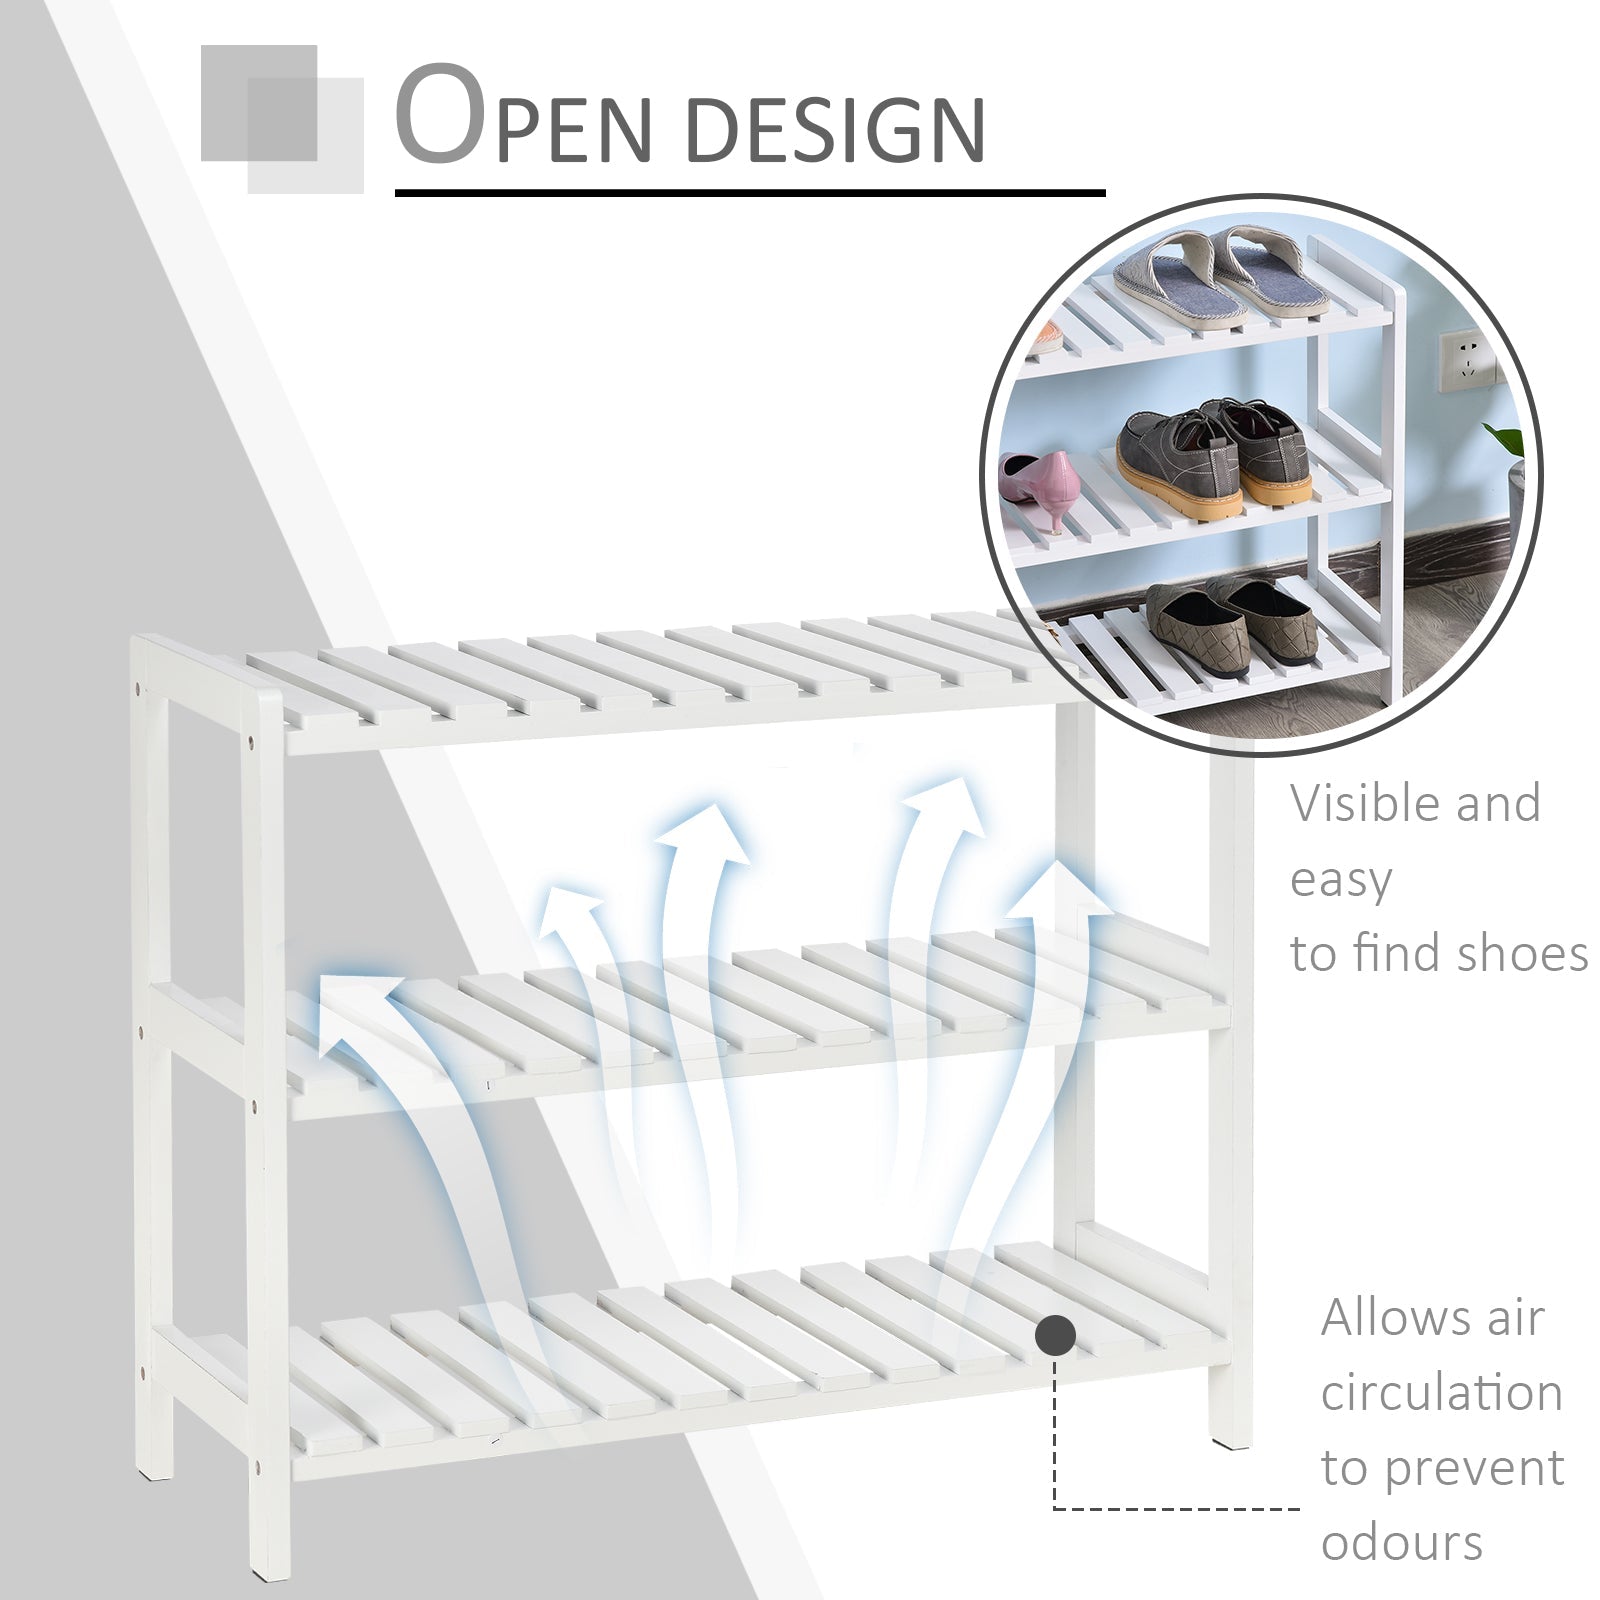 3-Tier Shoe Rack Wood Frame Slatted Shelves Spacious Open Hygienic Storage Home Hallway Furniture Family Guests 70L x 26W x 57.5H cm - White-3